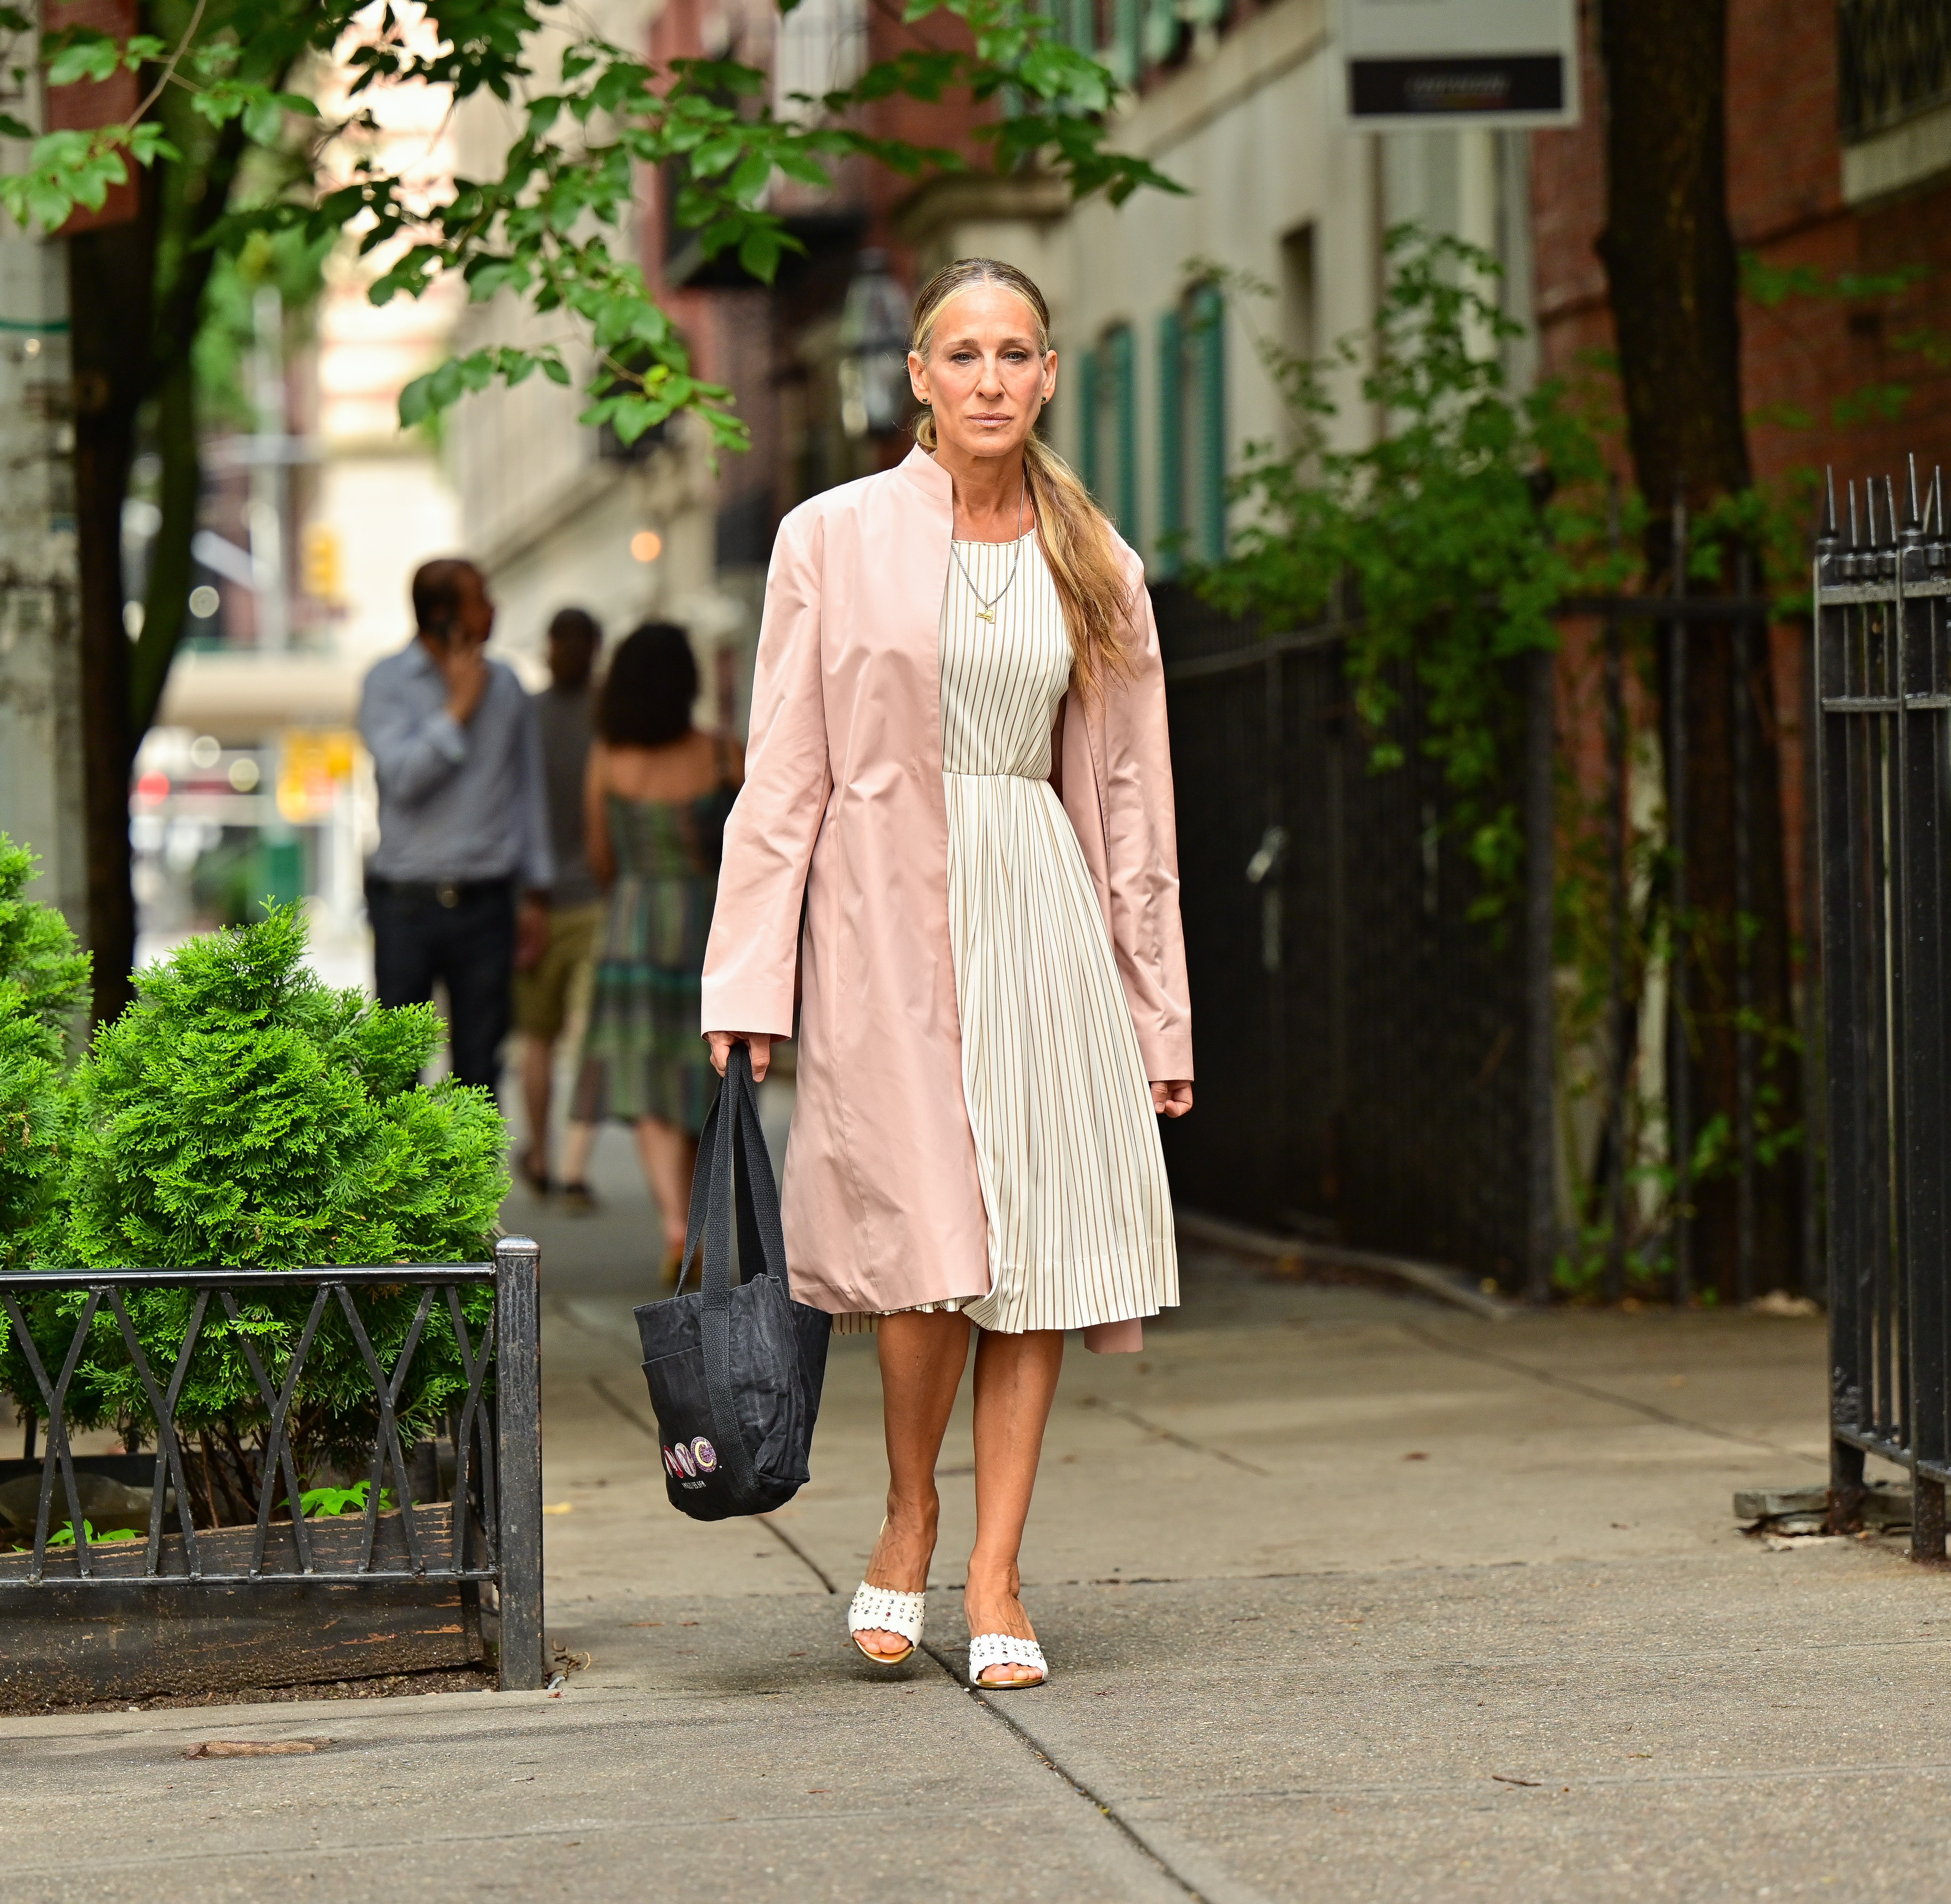 NEW YORK, NEW YORK - JULY 12:  Sarah Jessica Parker seen filming "And Just Like That..." the follow up series to "Sex and the City" on the Upper East Side on July 12, 2021 in New York City. (Photo by James Devaney/GC Images) (Foto: GC Images)